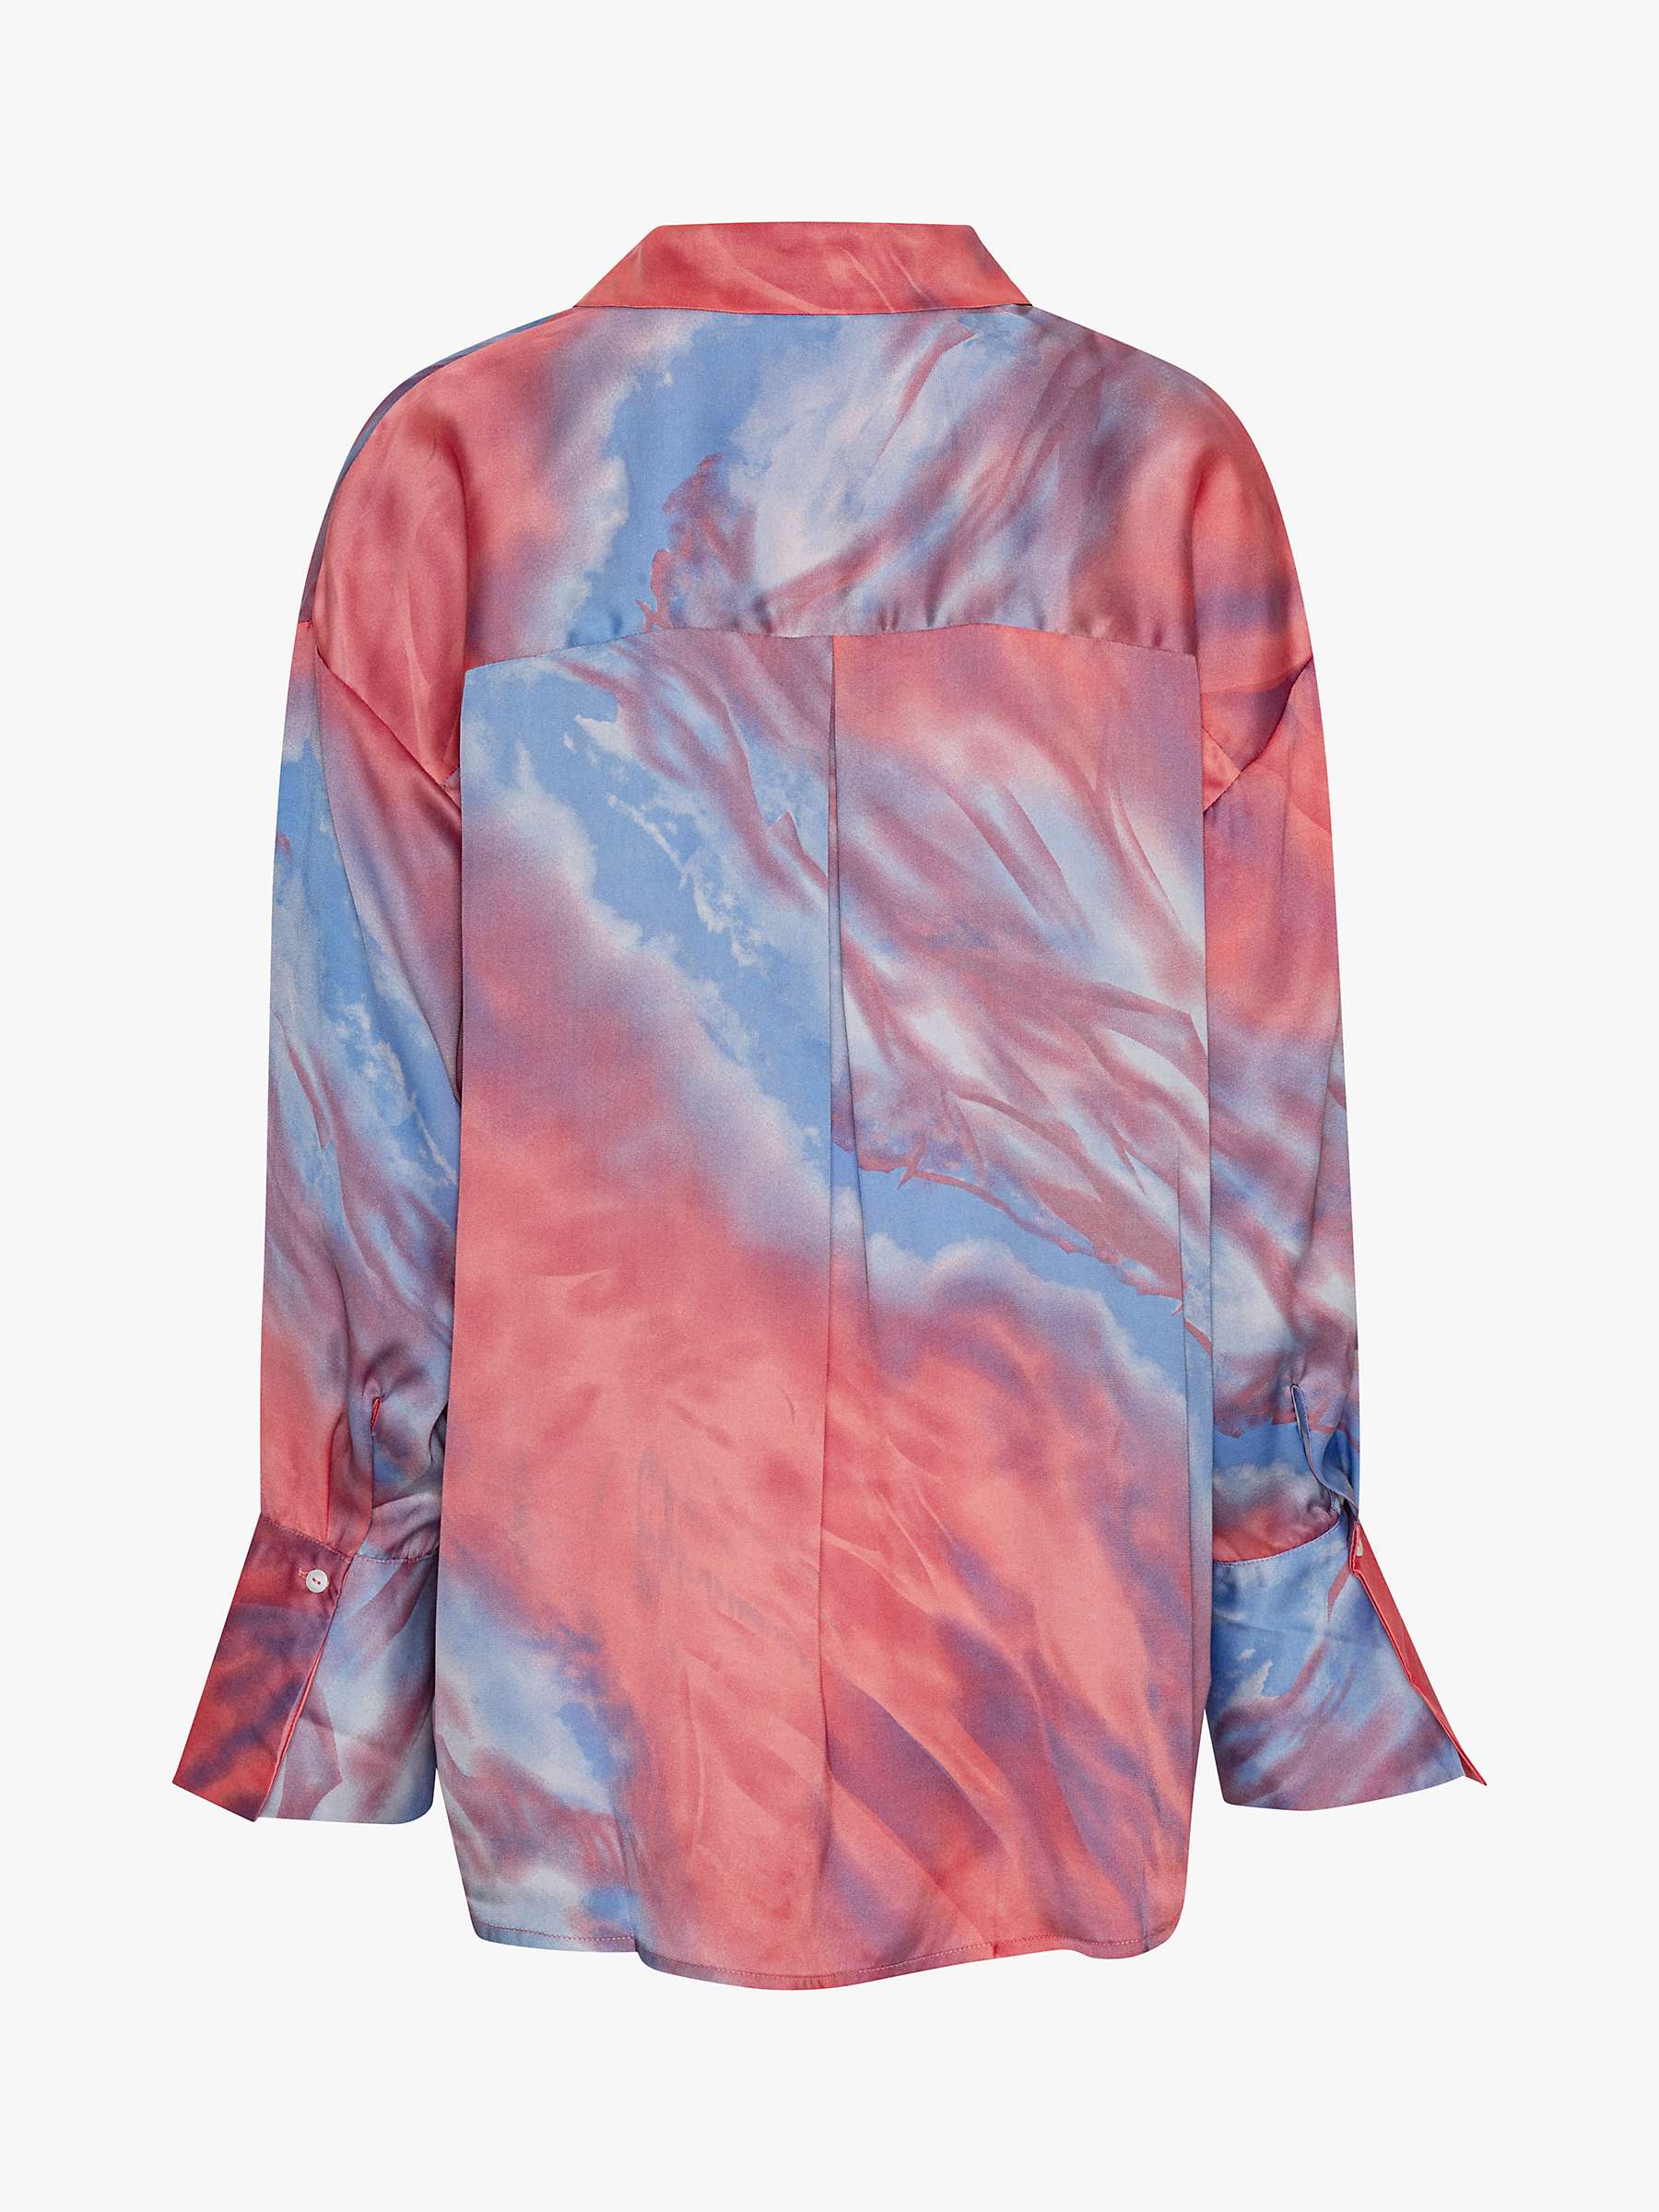 Buy A-VIEW Carina Abstract Print Shirt, Coral/Blue Online at johnlewis.com